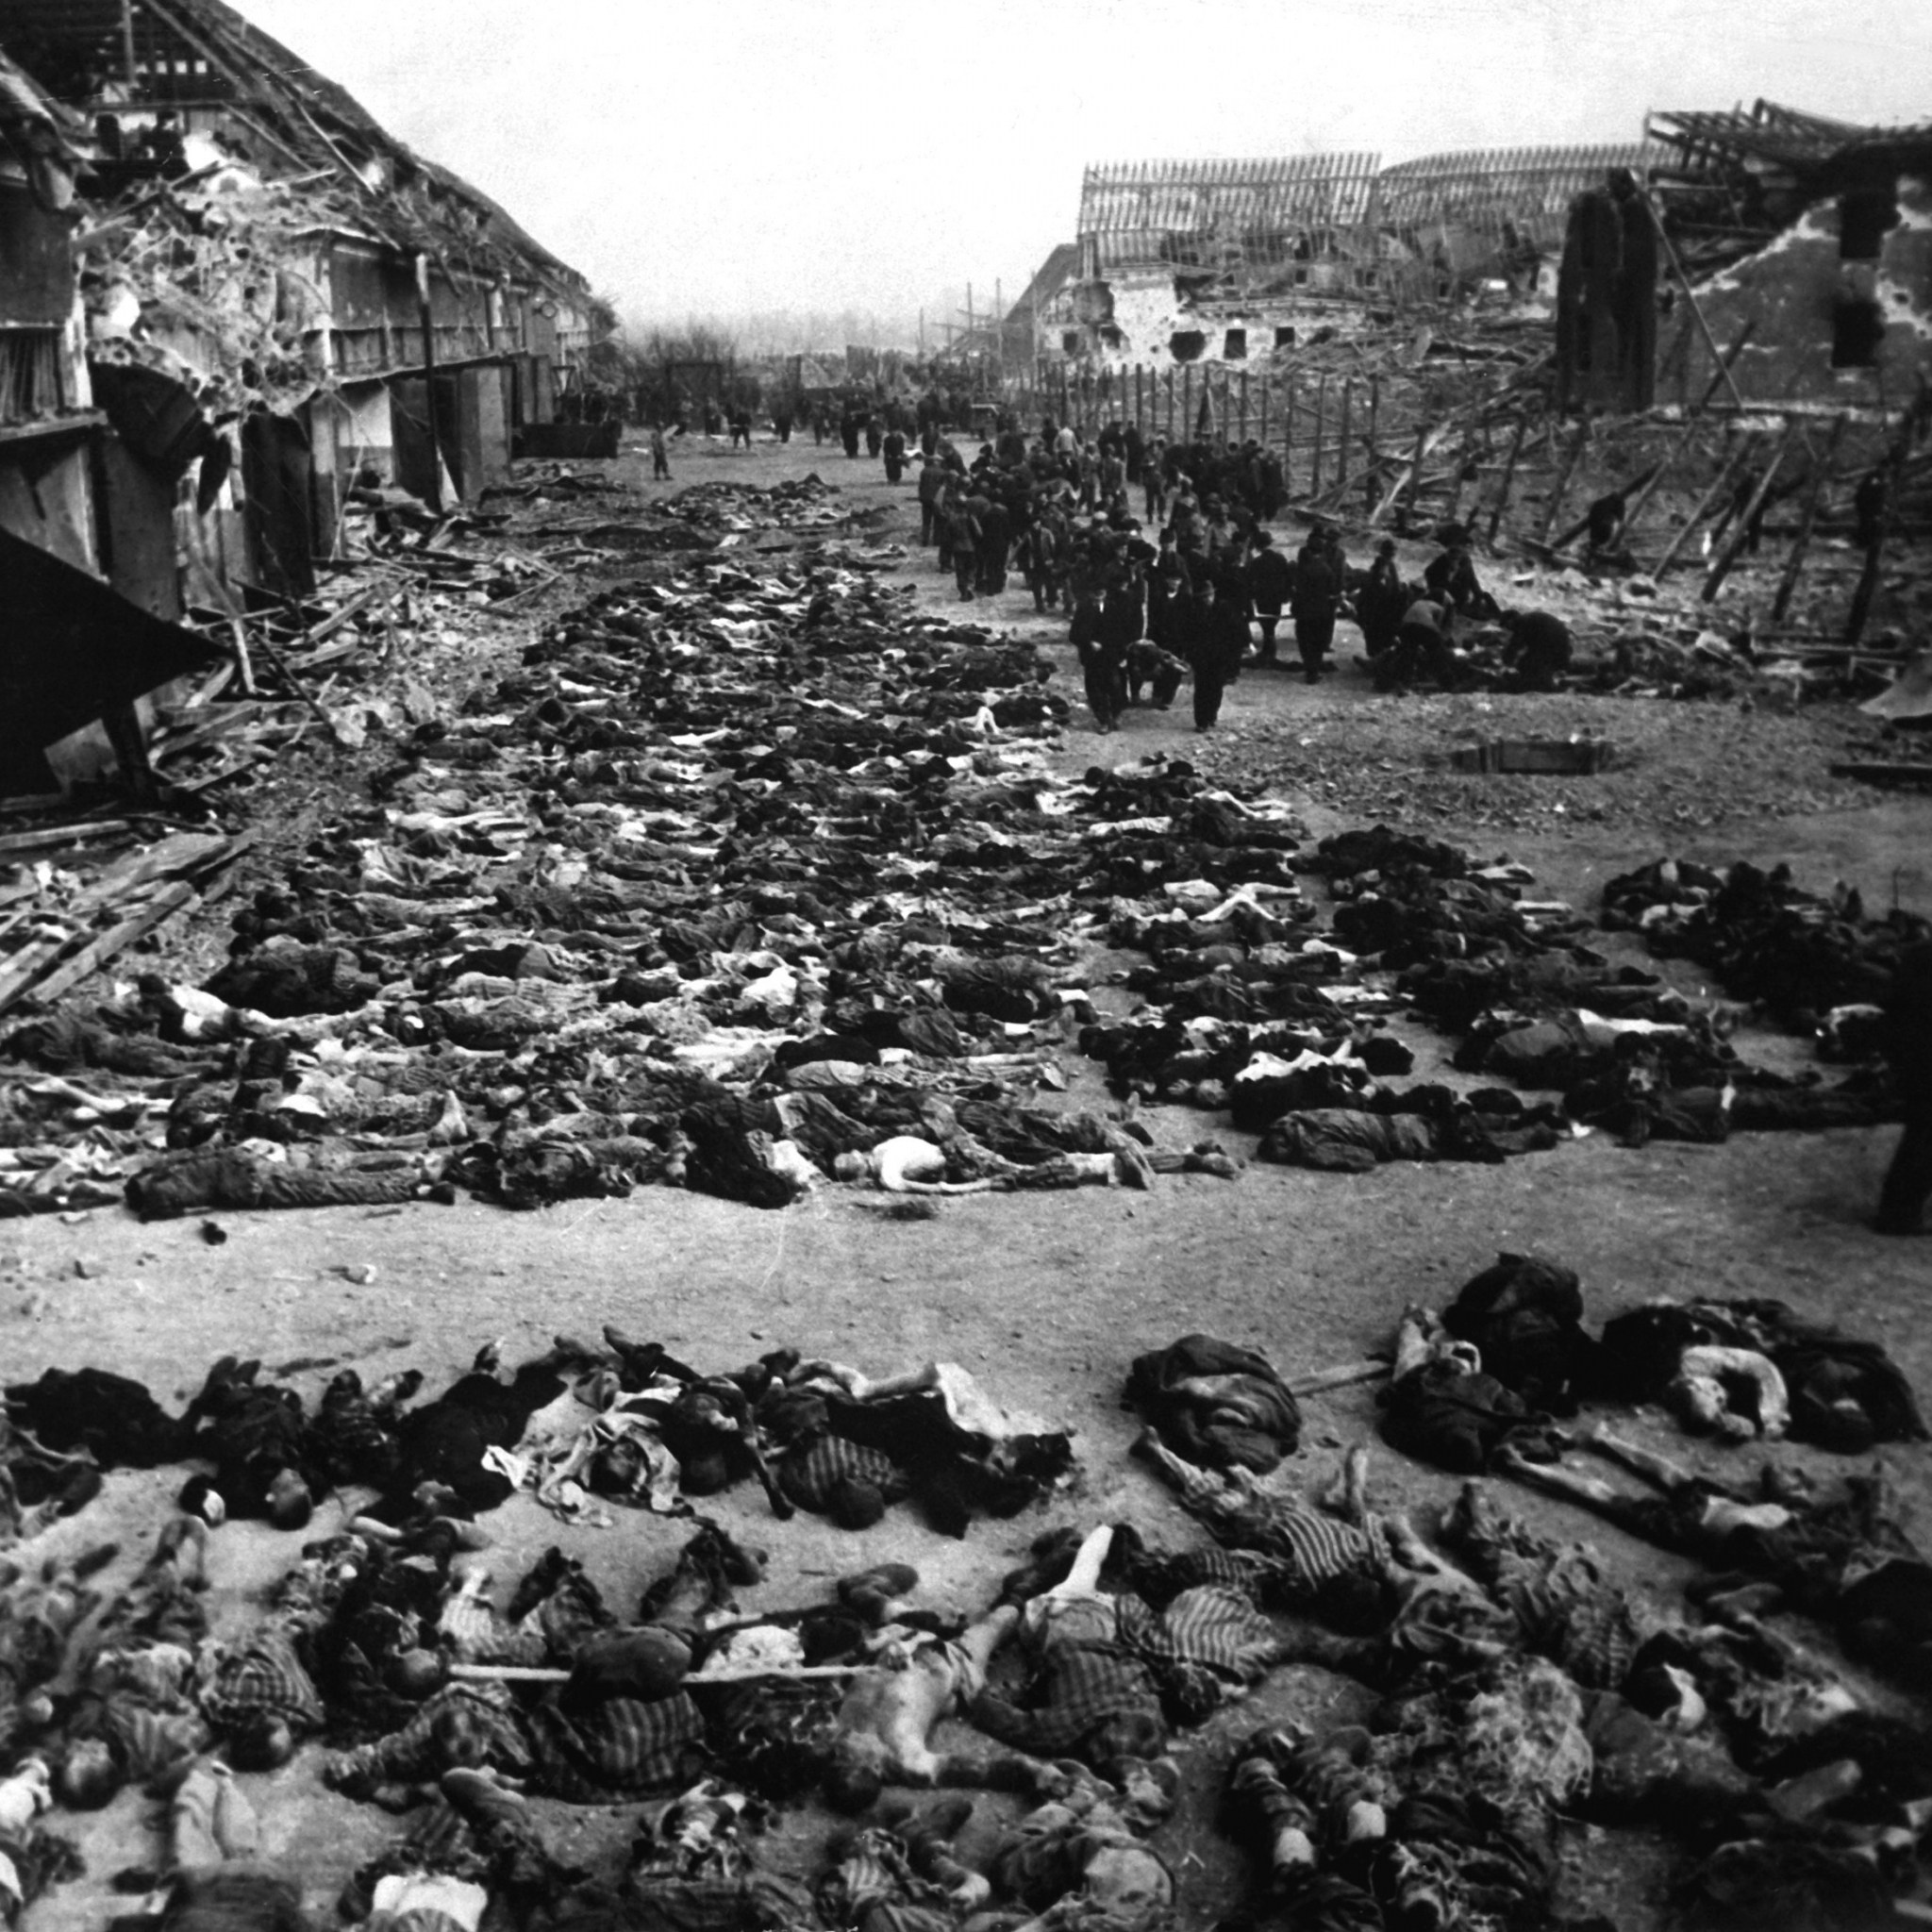 Rows_of_bodies_of_dead_inmates_fill_the_yard_of_Lager_Nordhausen,_a_Gestapo_concentration_camp.jpg